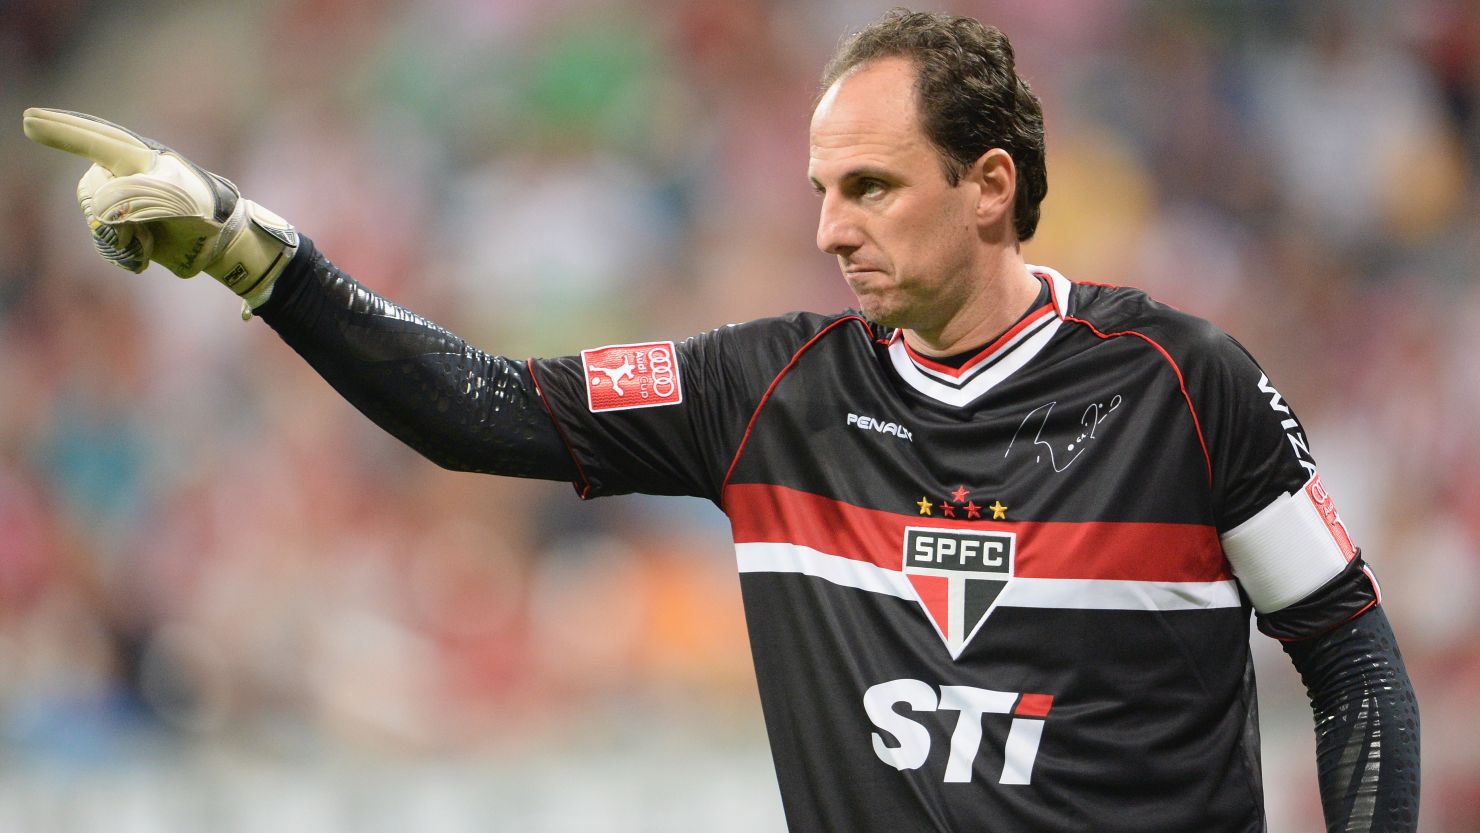 Rogerio Ceni is also the highest-scoring goalkeeper in history with 123 goals.